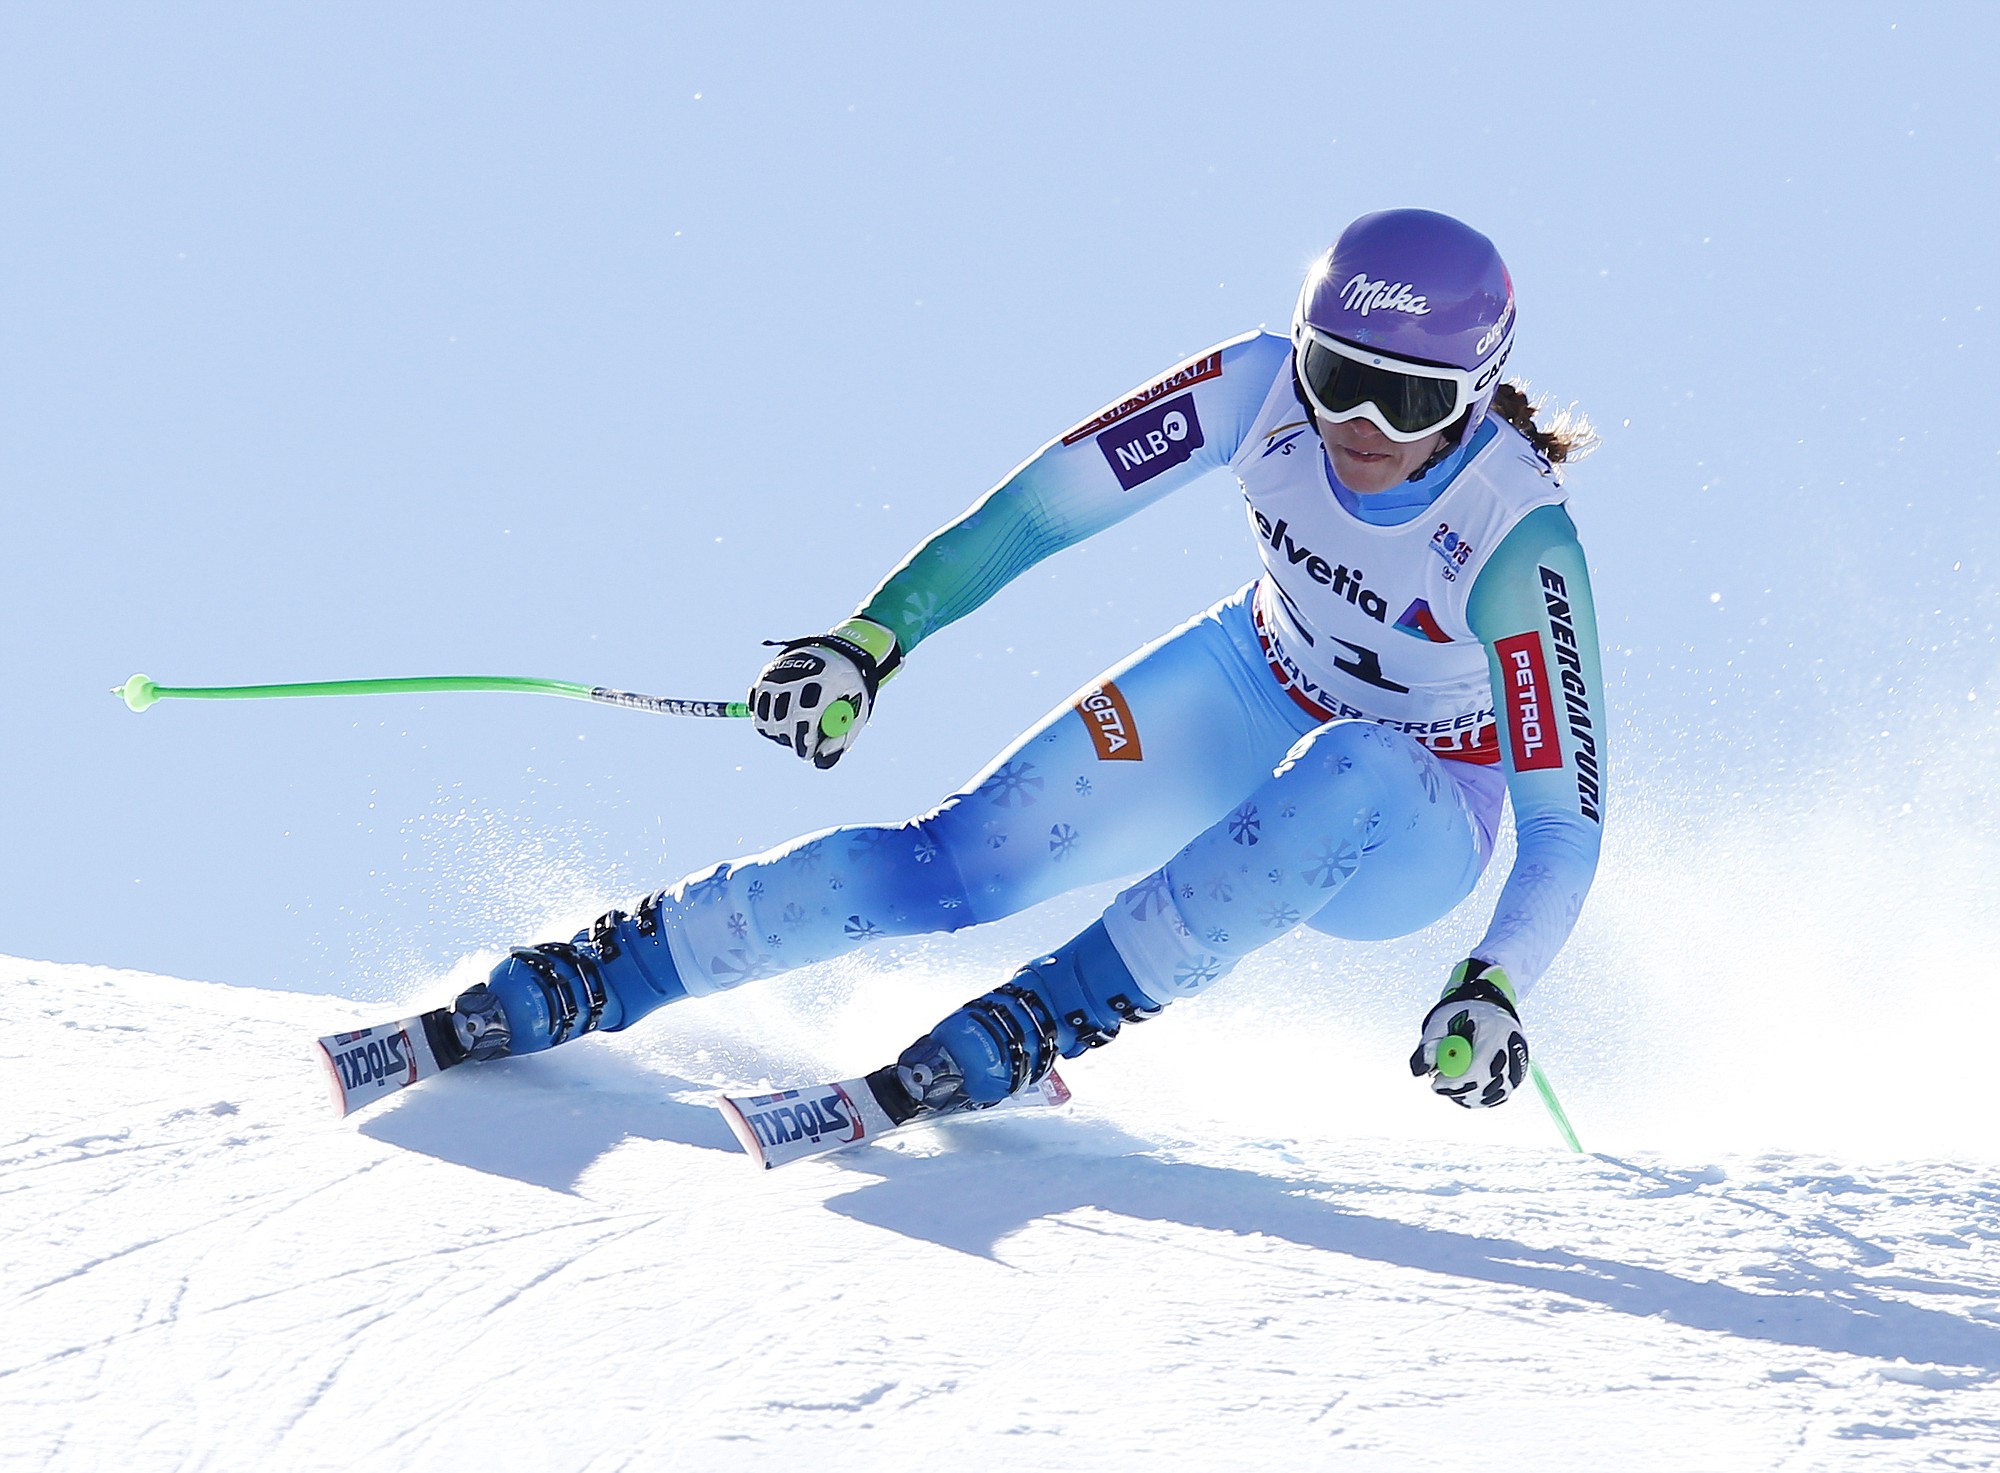 Slovenia's Tina Maze races during the women's downhill at the Alpine skiing world championship on Friday, Feb. 6, 2015, in Beaver Creek, Colo.